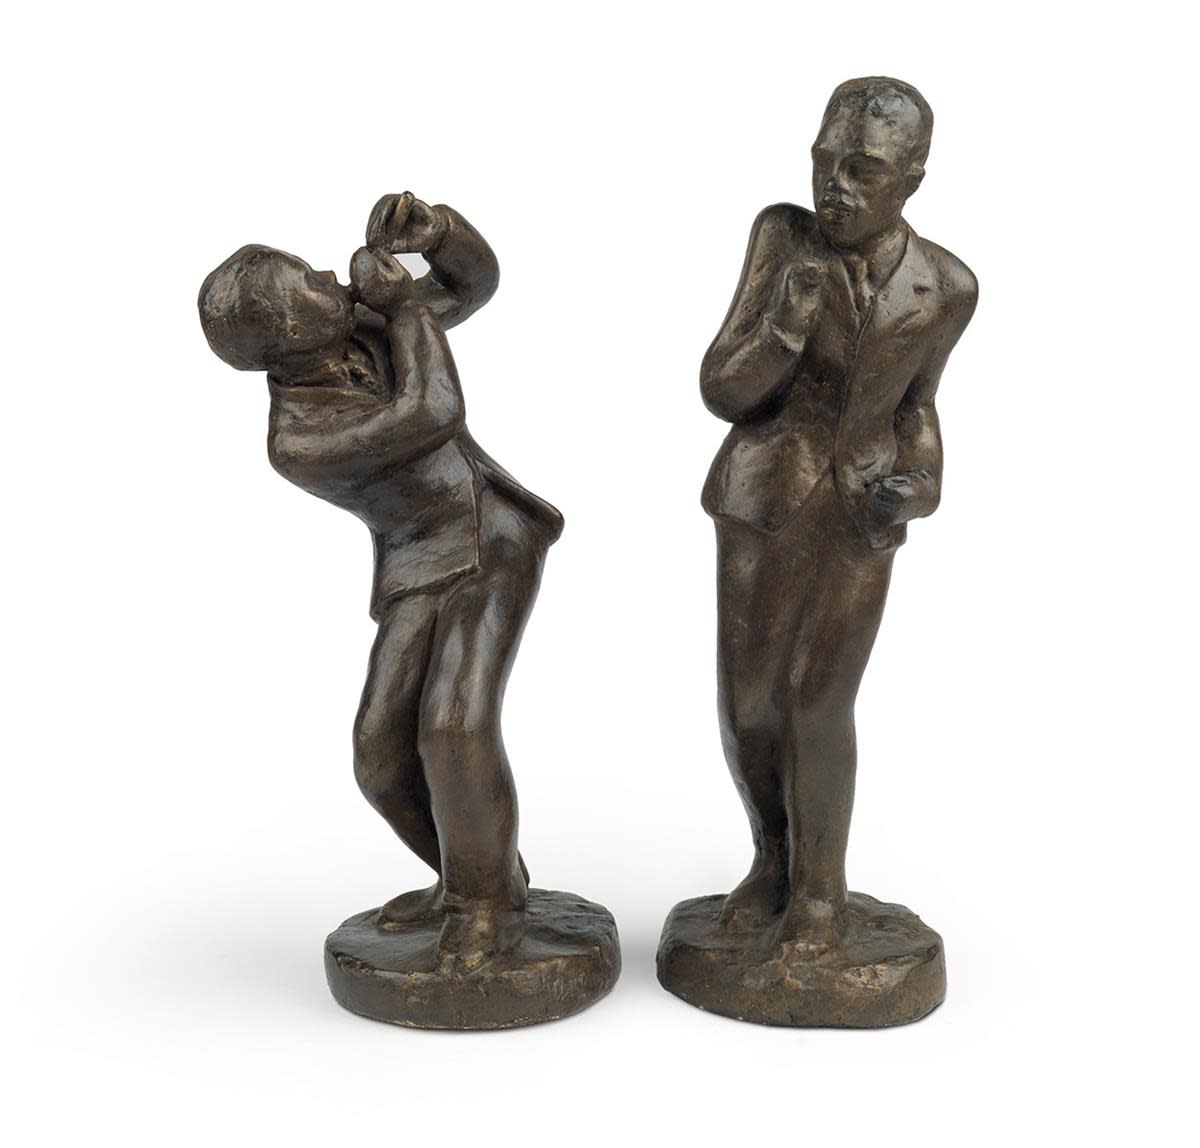 Pair of dancing figures, "Untitled (Flute Player)," painted plaster, circa 1939, approximately 13” h; "Untitled (Dancer)," painted plaster, circa 1939, approximately 15-1/2” h; $32,500. Savage made two other similar sculptures of dancing figures, Susie Q and Truckin’, both also circa 1939.